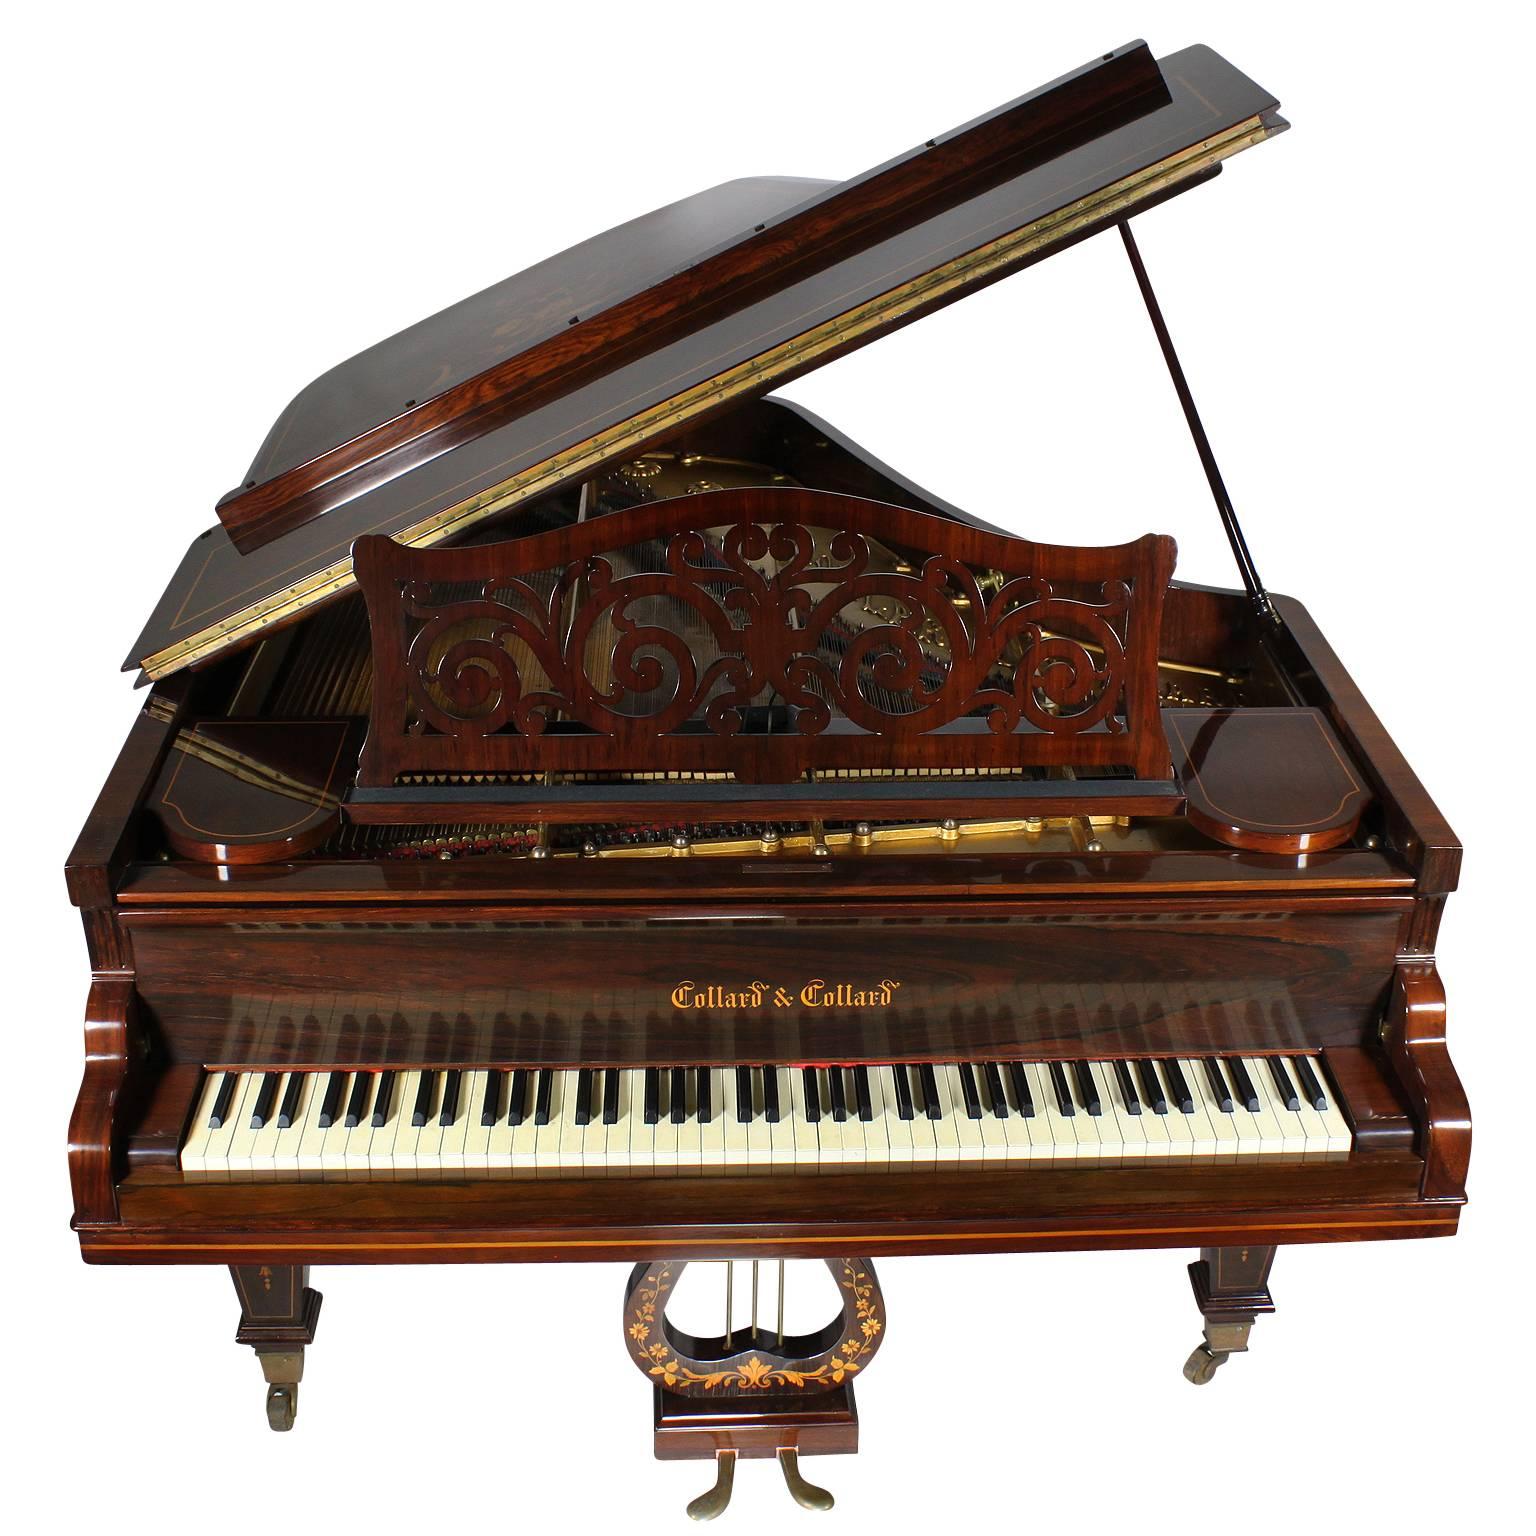 A very fine Anglo-French 19th century rosewood, palisander, amboyna and satinwood marquetry (inlaid) art-case baby grand piano, the works by 